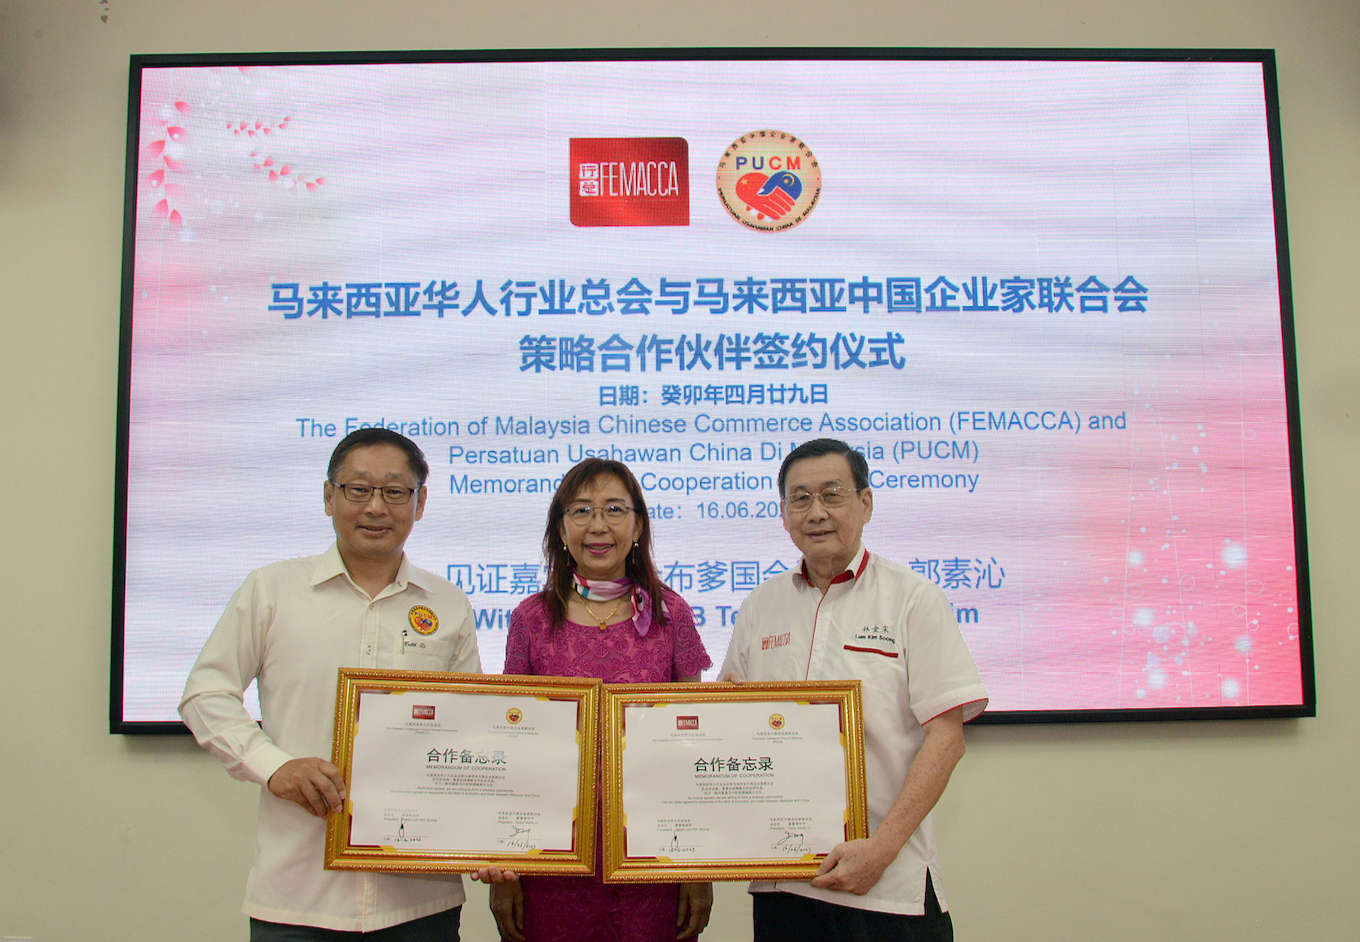 PUCM to join hands with FEMACCA to enhance cooperation in various fields between Malaysia and China